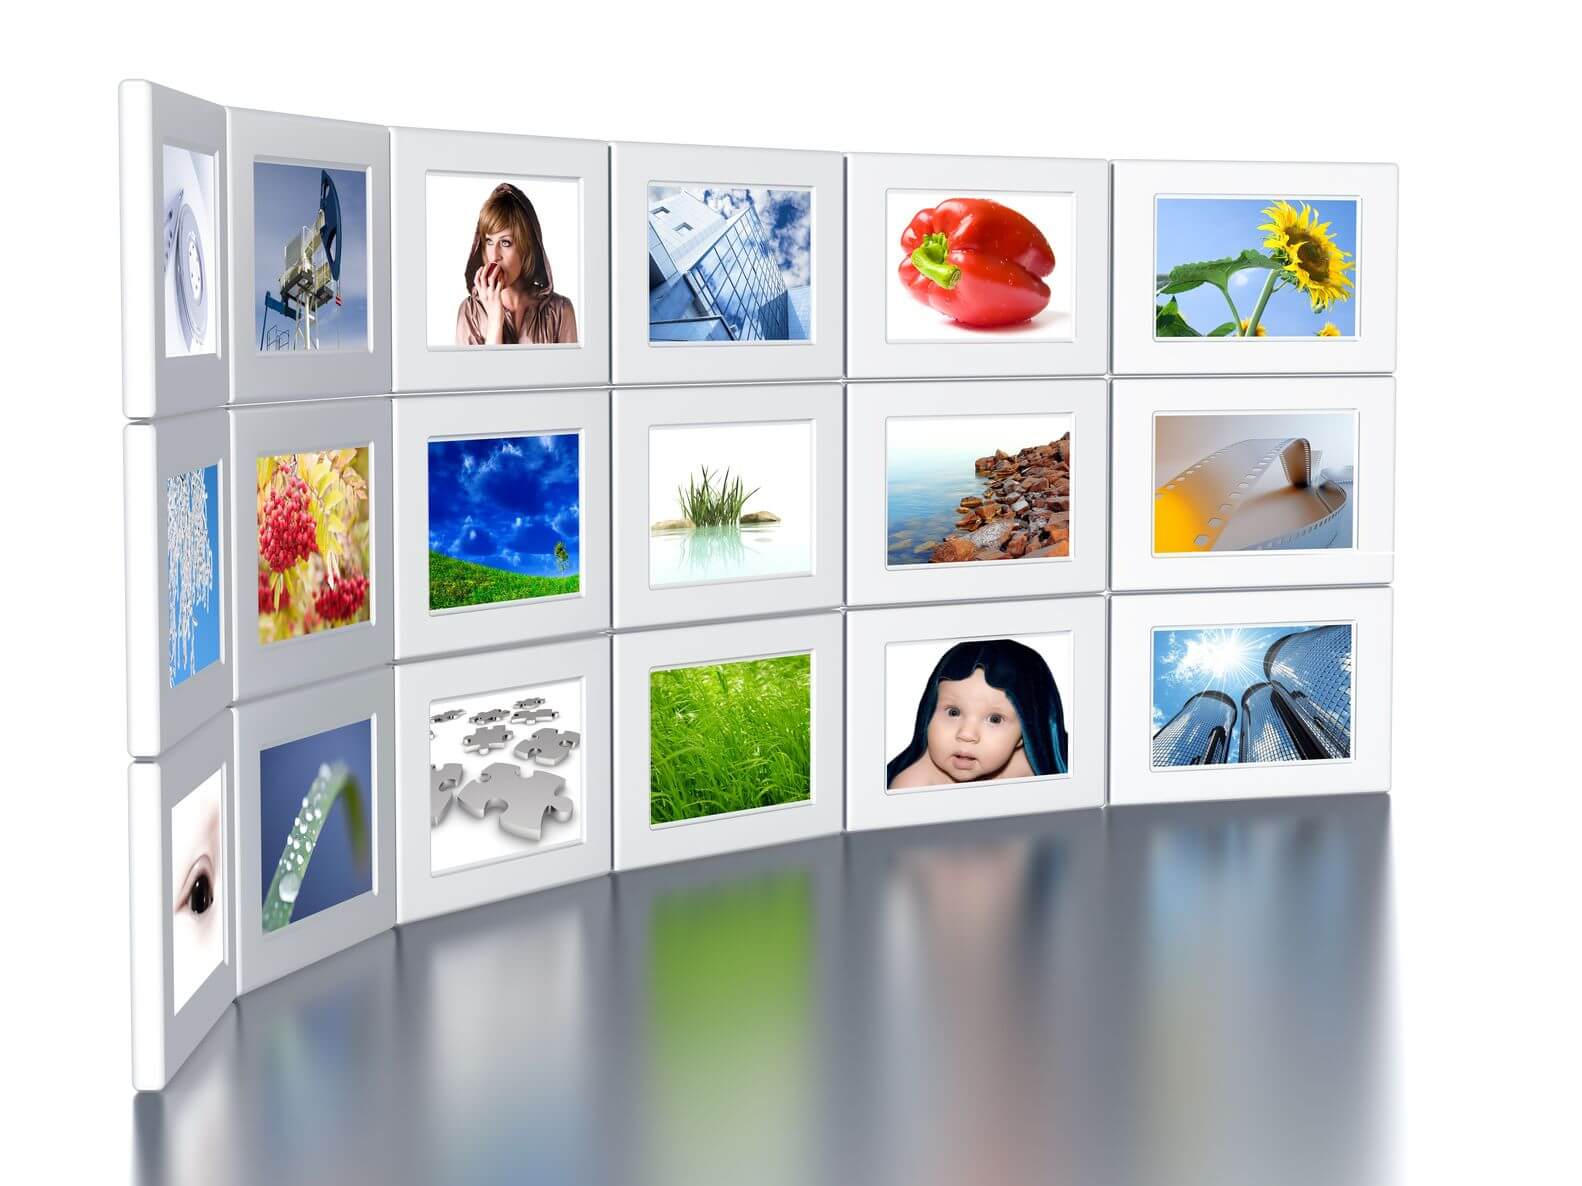 An image of a gallery wall with 15 different images.